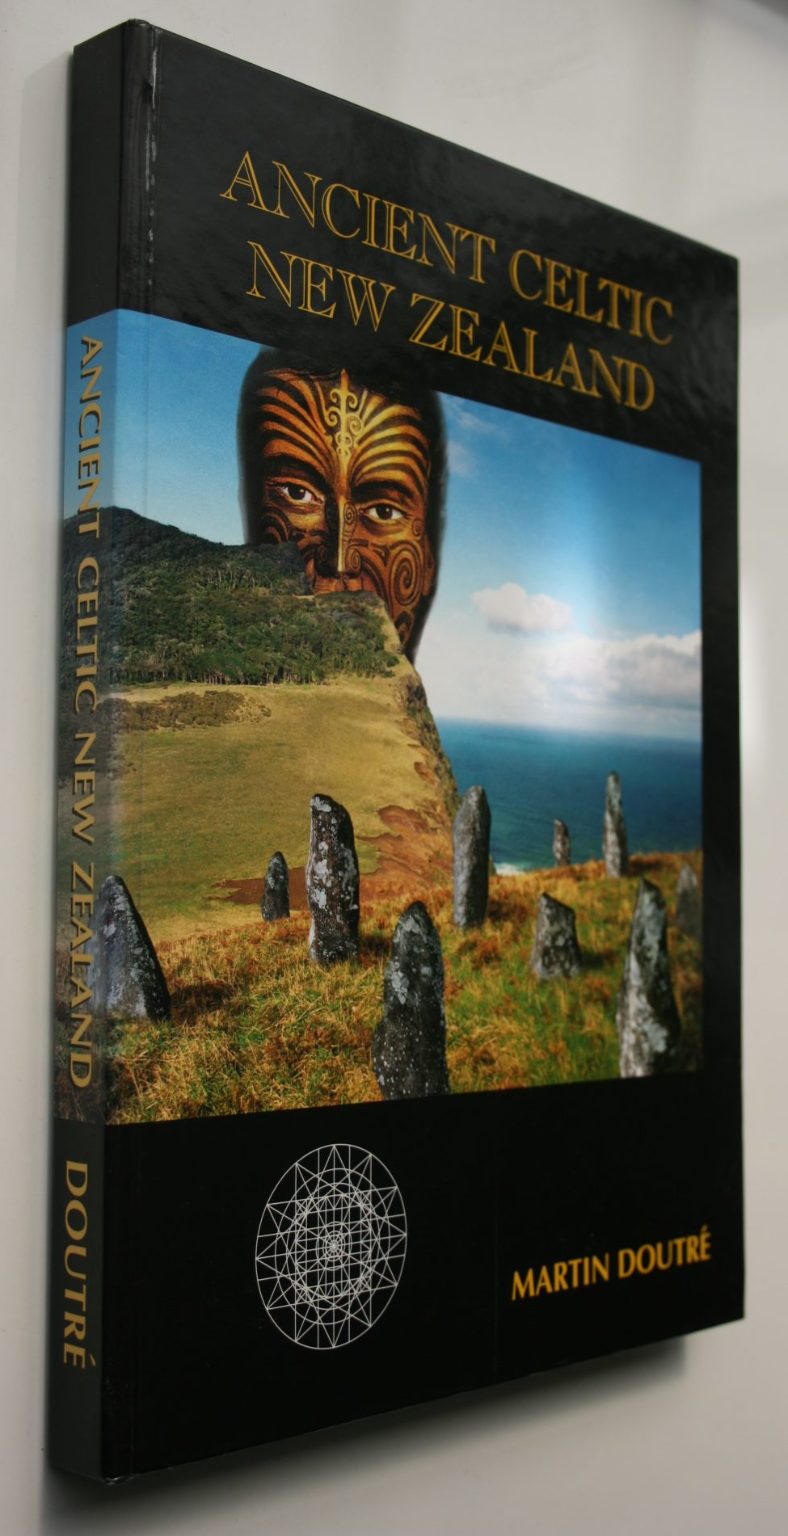 Ancient Celtic New Zealand by Martin Doutre.